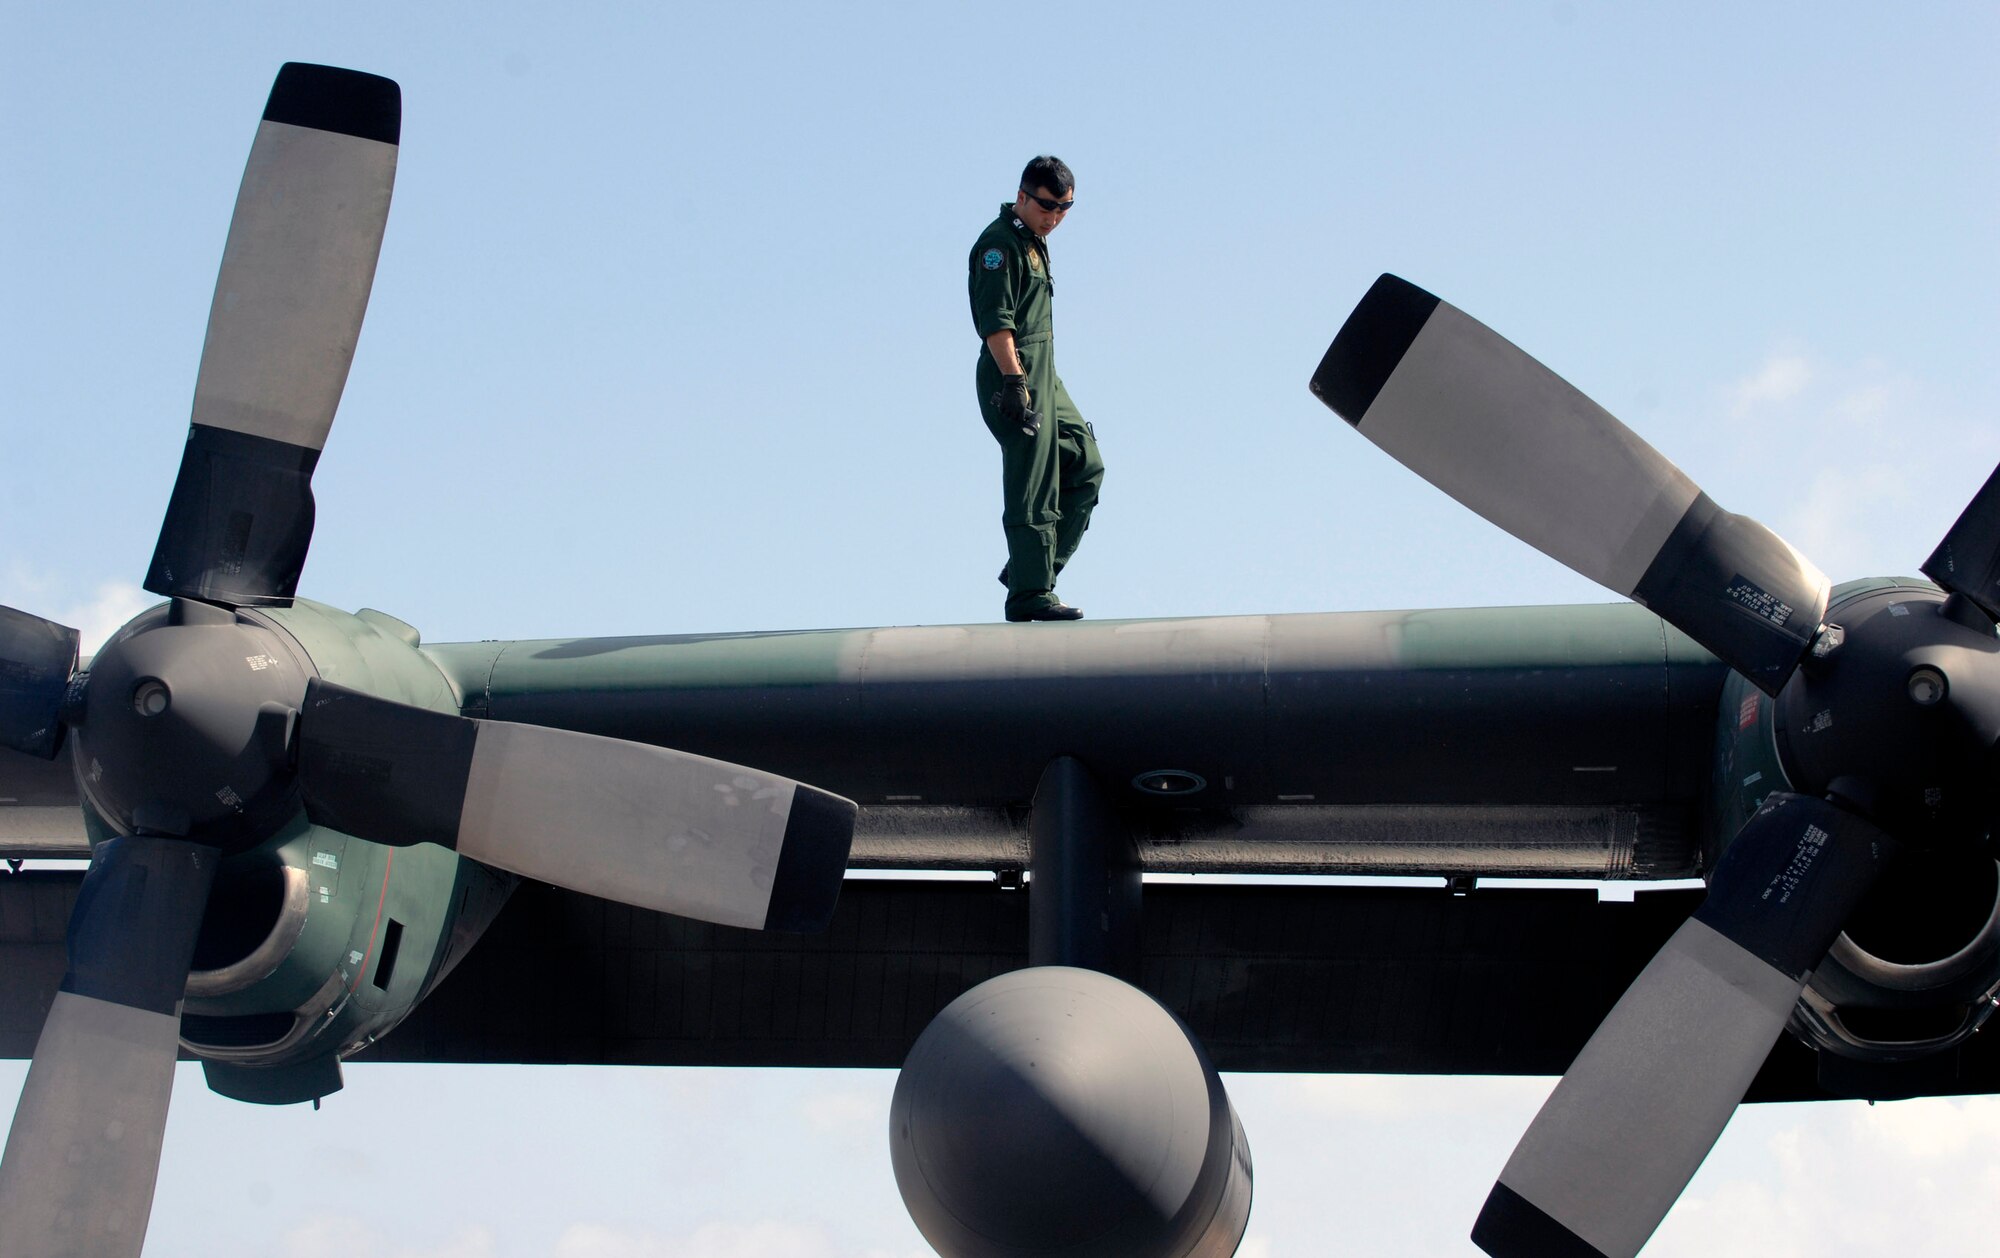 A Japan Air Self Defense Force member performs post flight maintenance on a JASDF C-130 after its arrival for participation in Exercise Cope North 09-1 Jan. 27 at Andersen Air Force Base, Guam. More than 60 JASDF members arrived in three C-130s to participate in the regularly scheduled exercise scheduled for Feb. 2 through 13. Cope North is designed to enhance U.S. and Japanese air operations in defense of Japan. (U.S. Air Force photo/Master Sgt. Kevin J. Gruenwald) 
